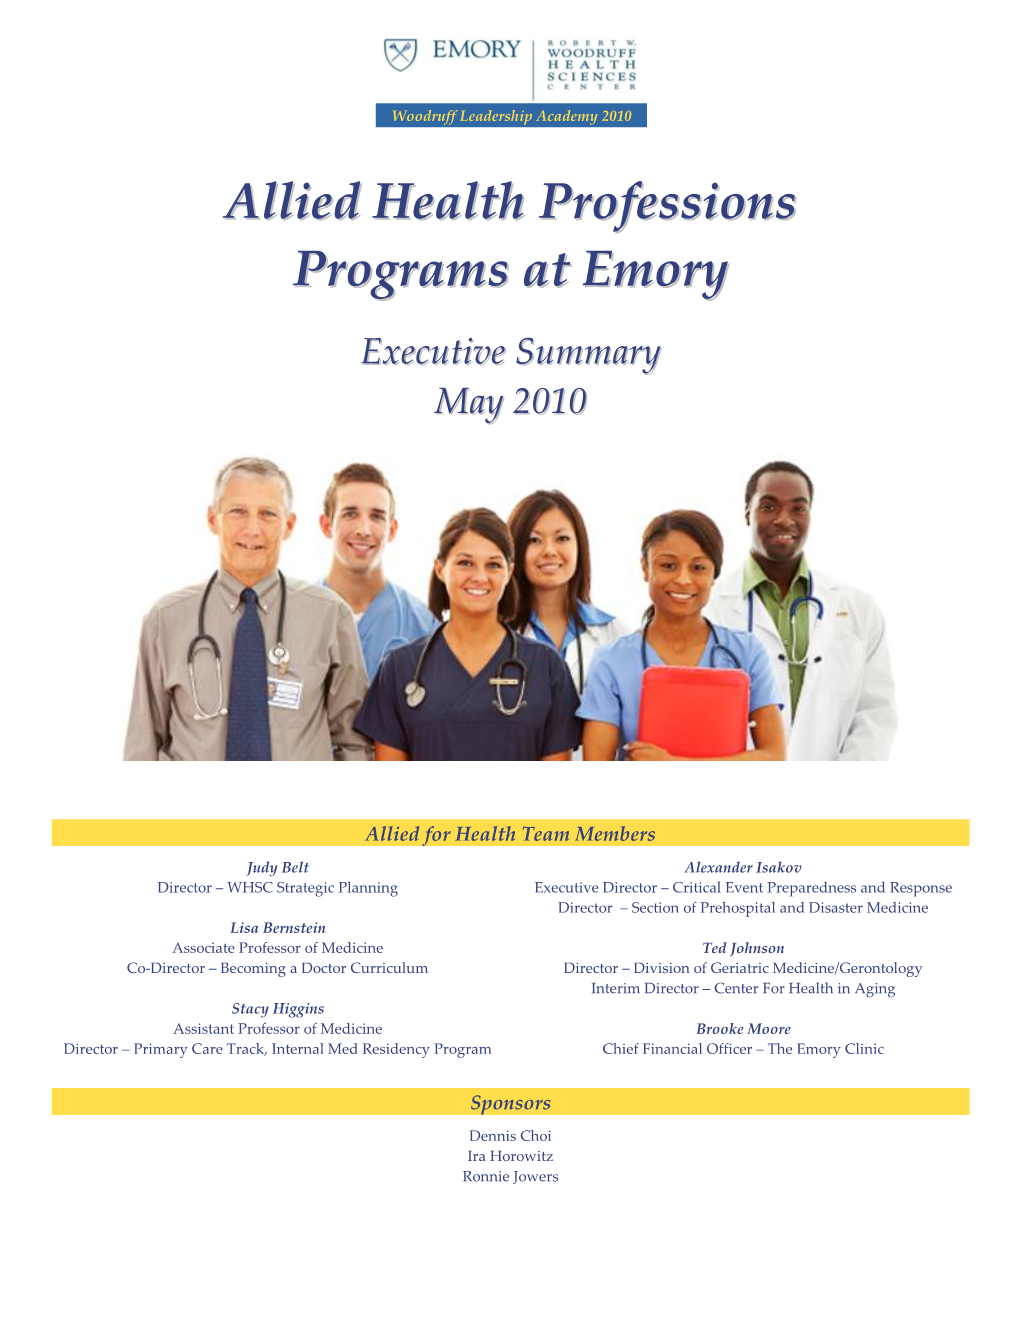 Allied Health Professions Programs at Emory That Best Supports the Following Objectives